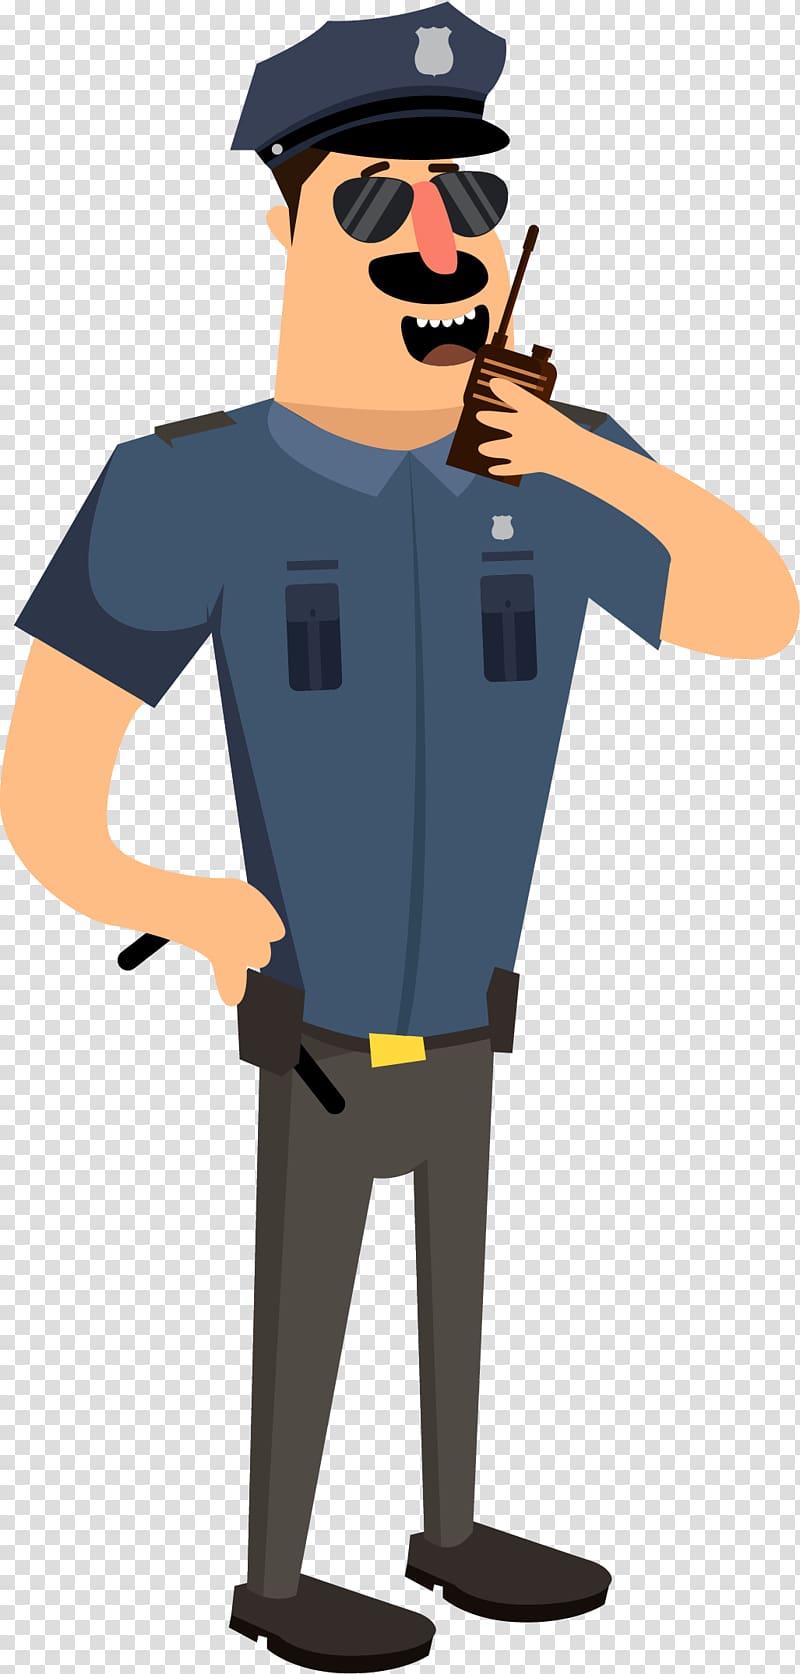 Cartoon Drawing Police Illustration, Walkie talkie, cop transparent background PNG clipart